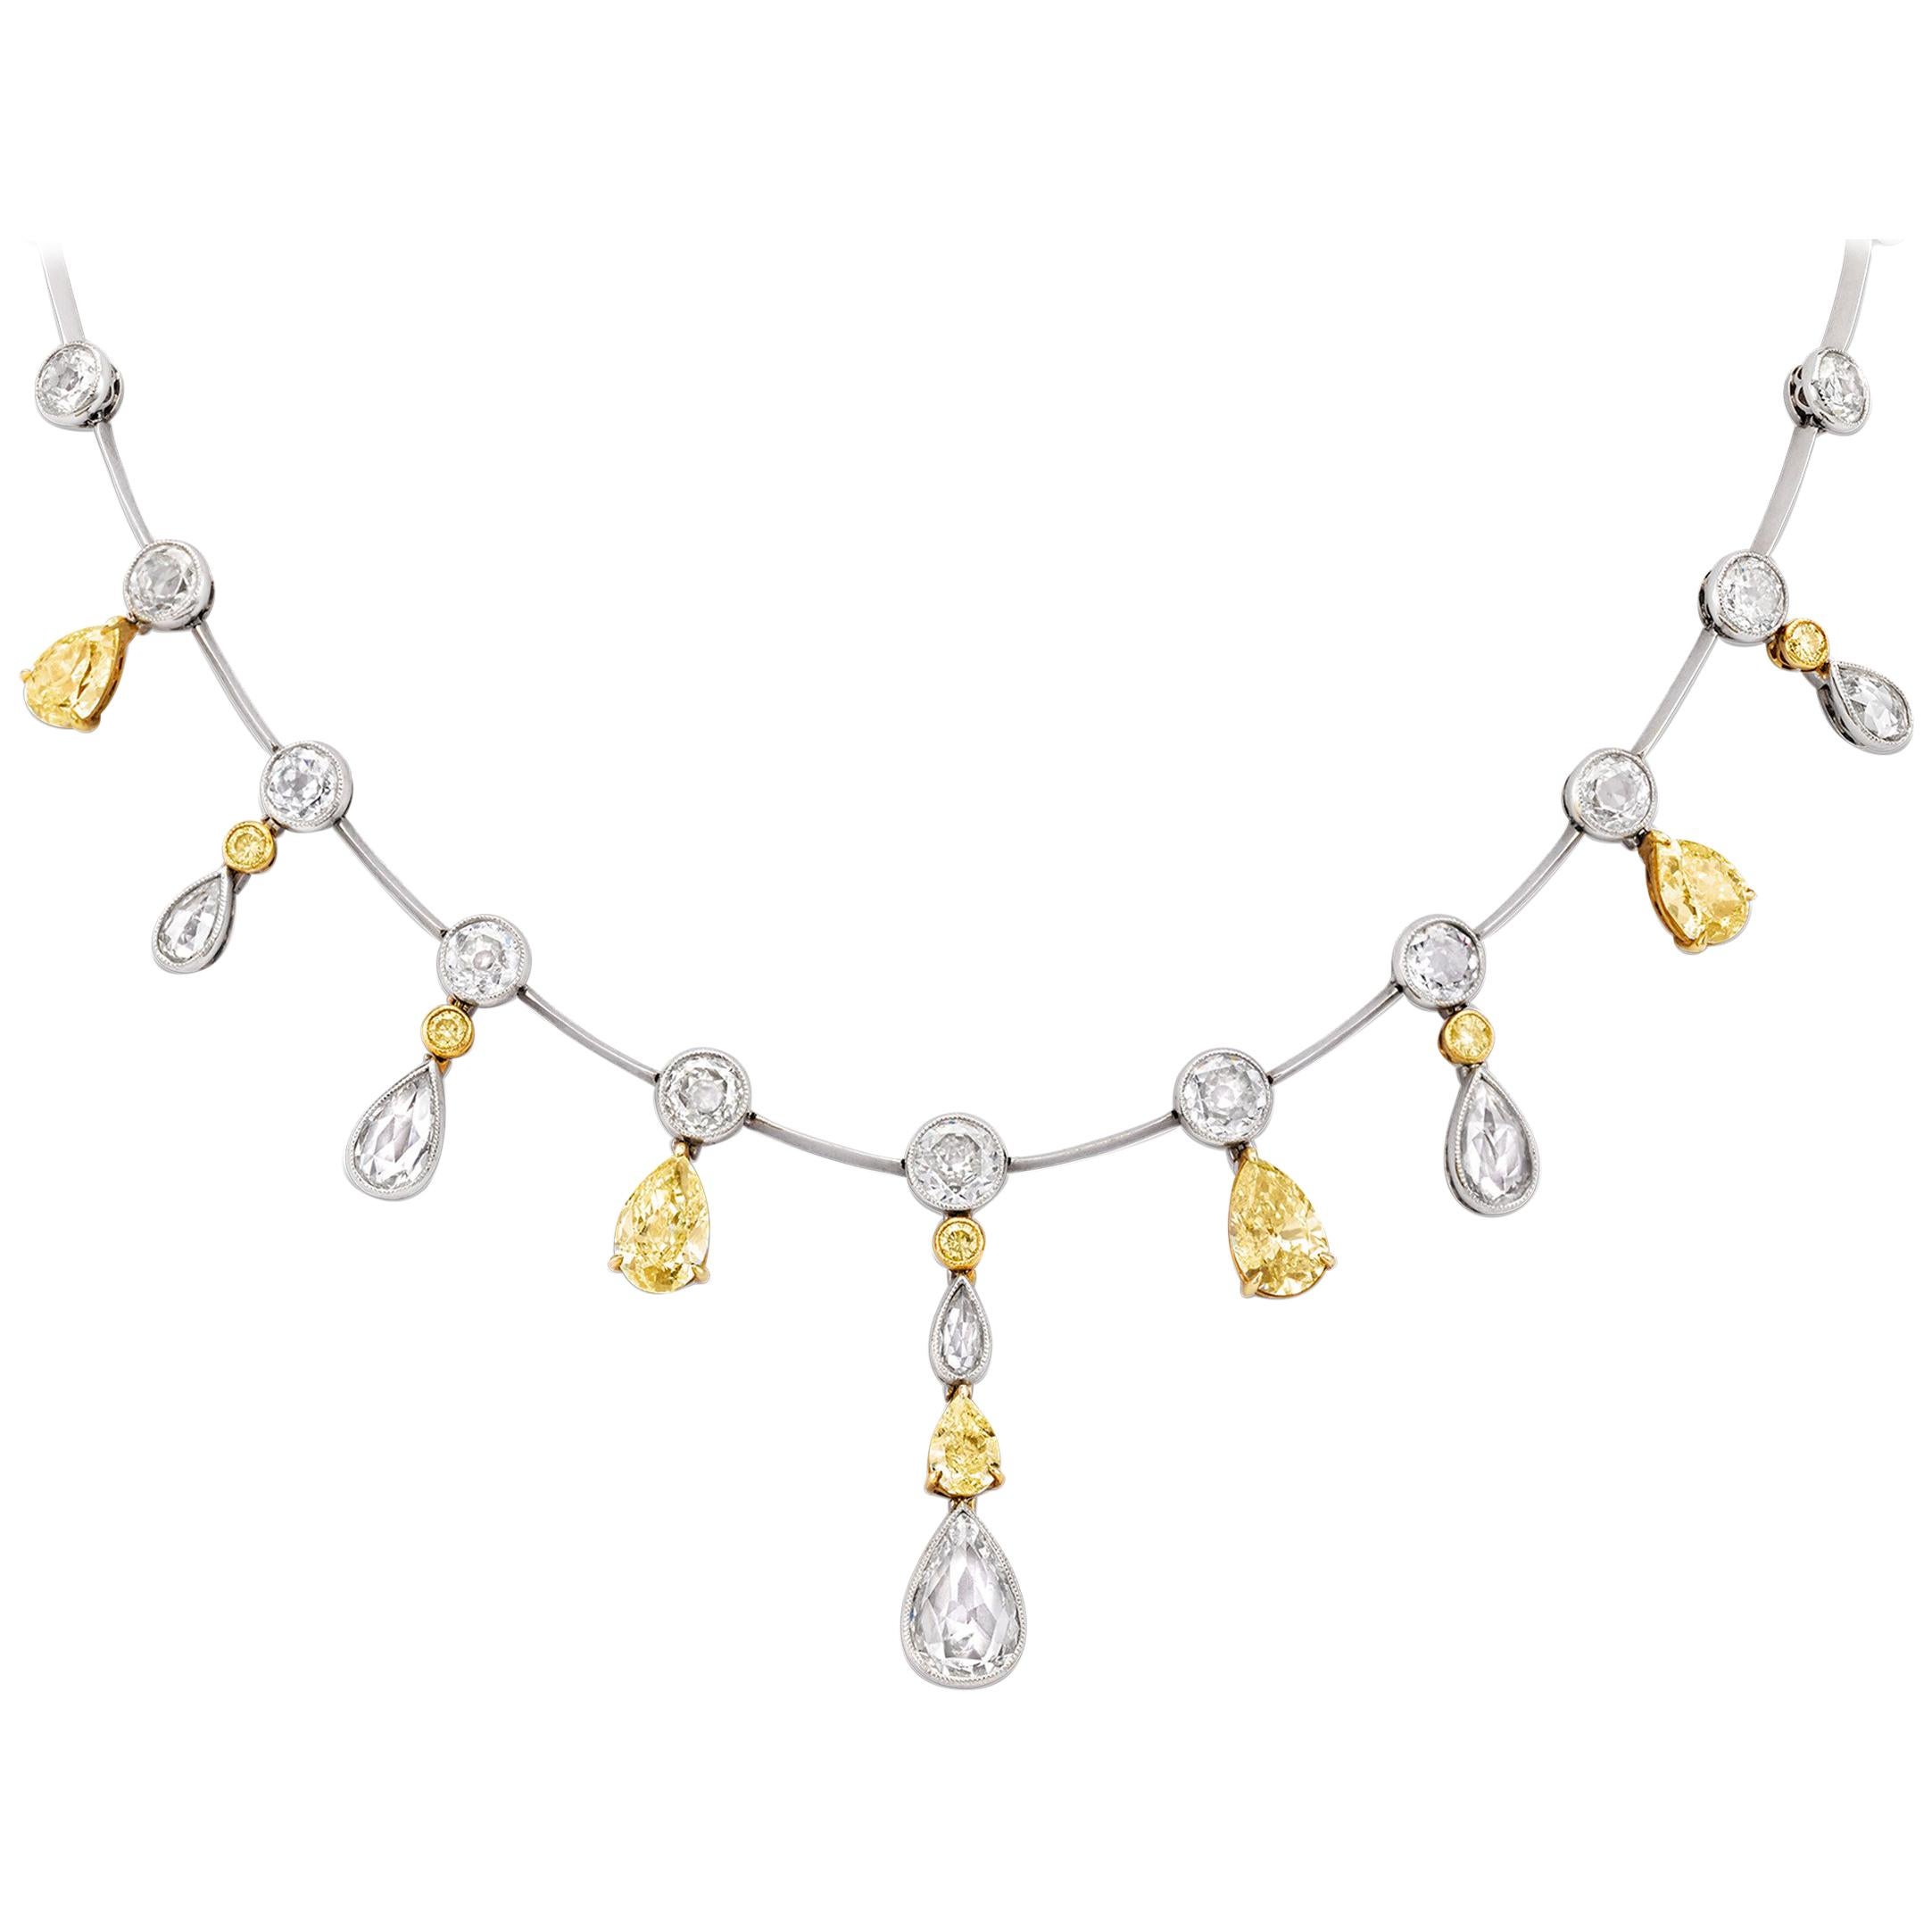 Fancy Yellow and White Diamond Necklace, 20.79 Carat